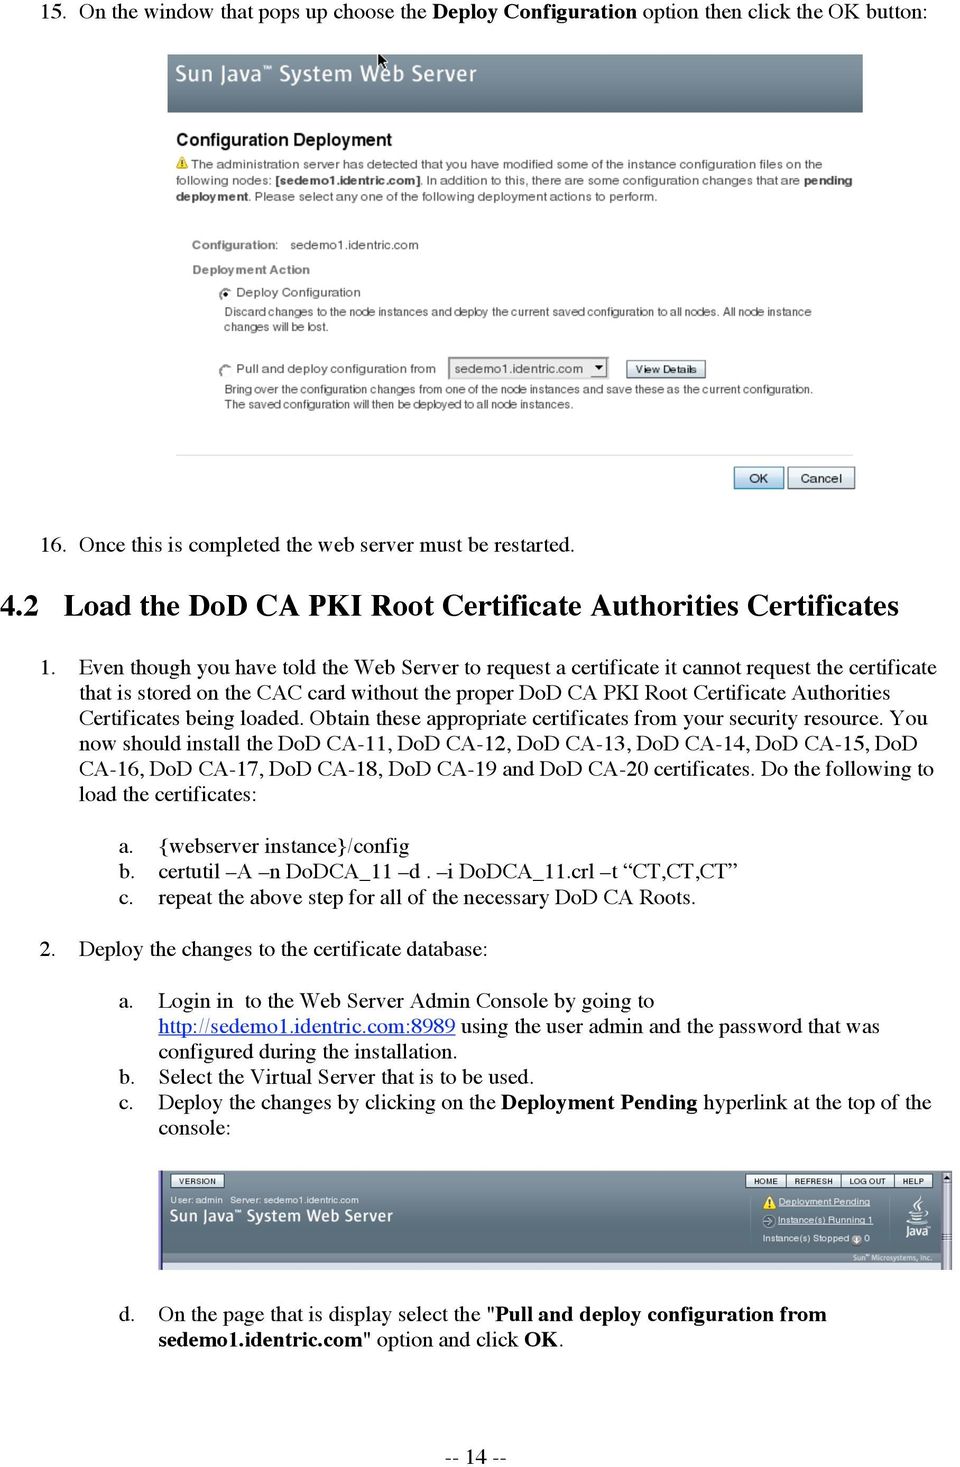 Even though you have told the Web Server to request a certificate it cannot request the certificate that is stored on the CAC card without the proper DoD CA PKI Root Certificate Authorities